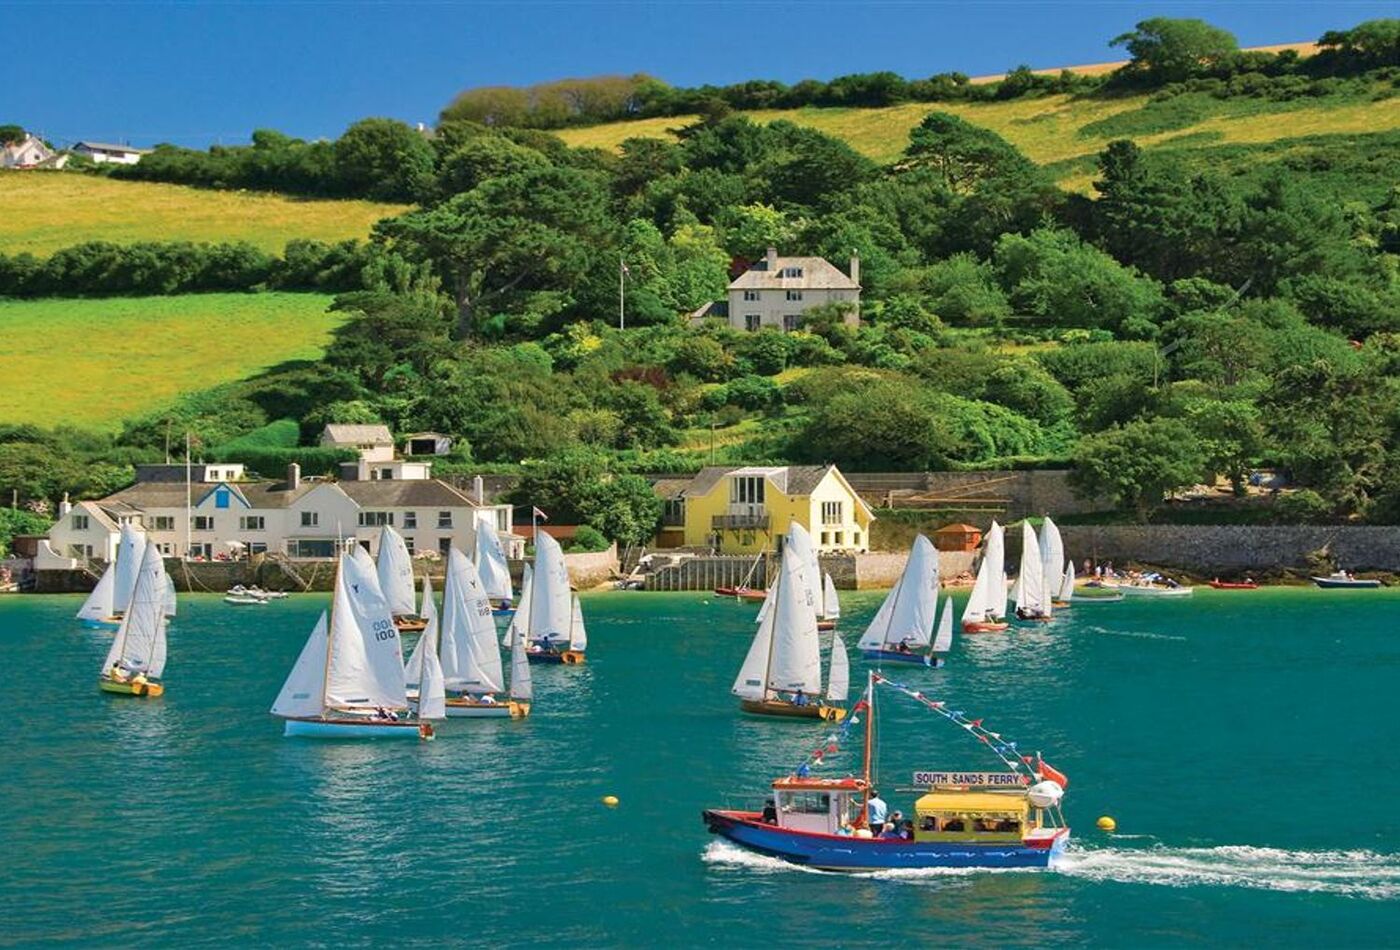 Boat hire in salcombe - sailing boats enjoying the water on a summers day.